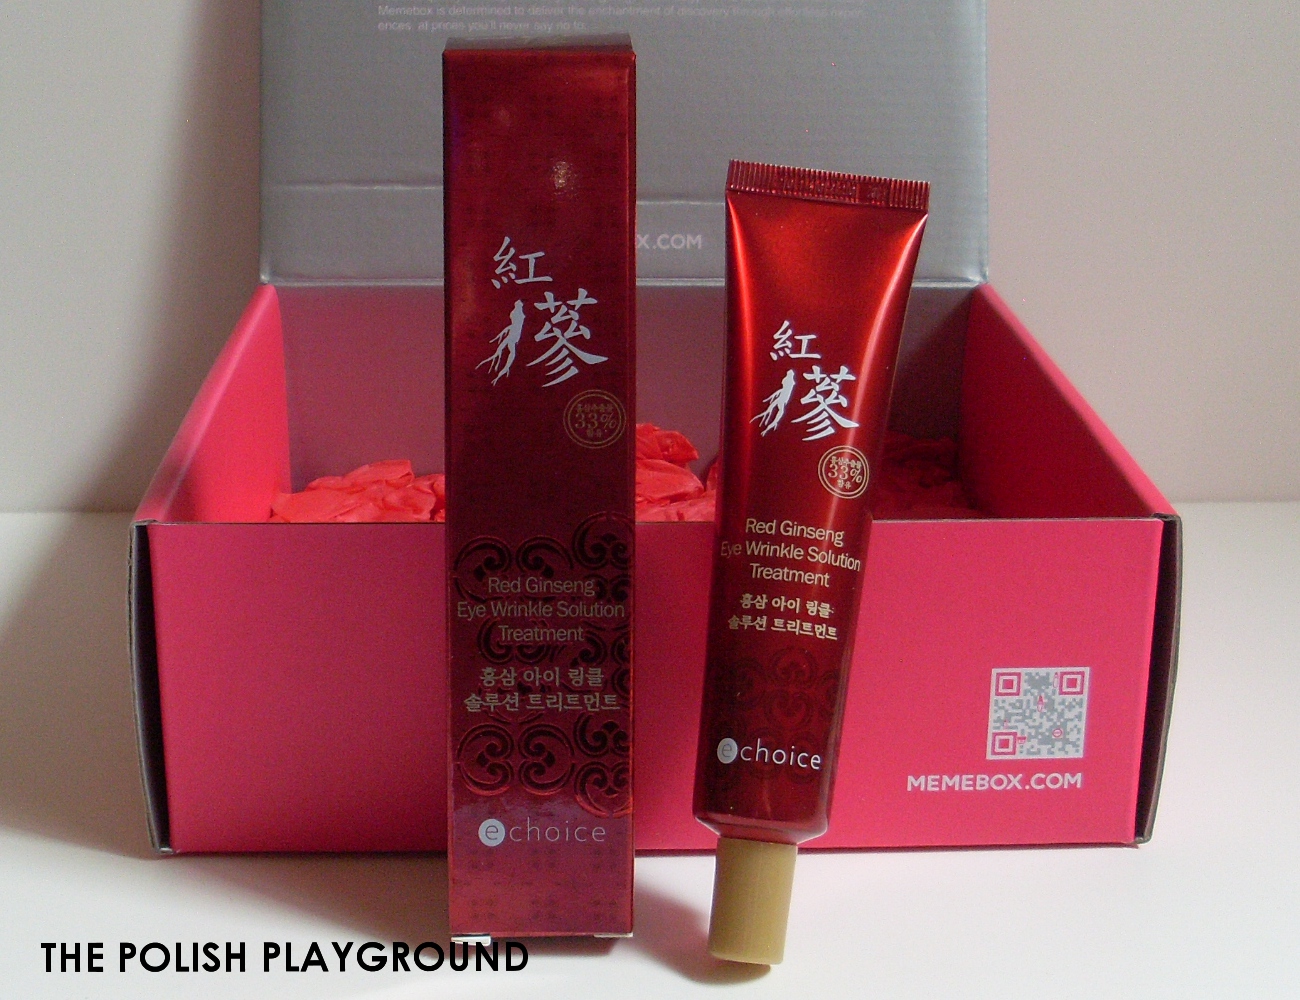 Memebox Special #20 Superfood Unboxing - e choice Red Ginseng Eye Wrinkle Solution Treatment